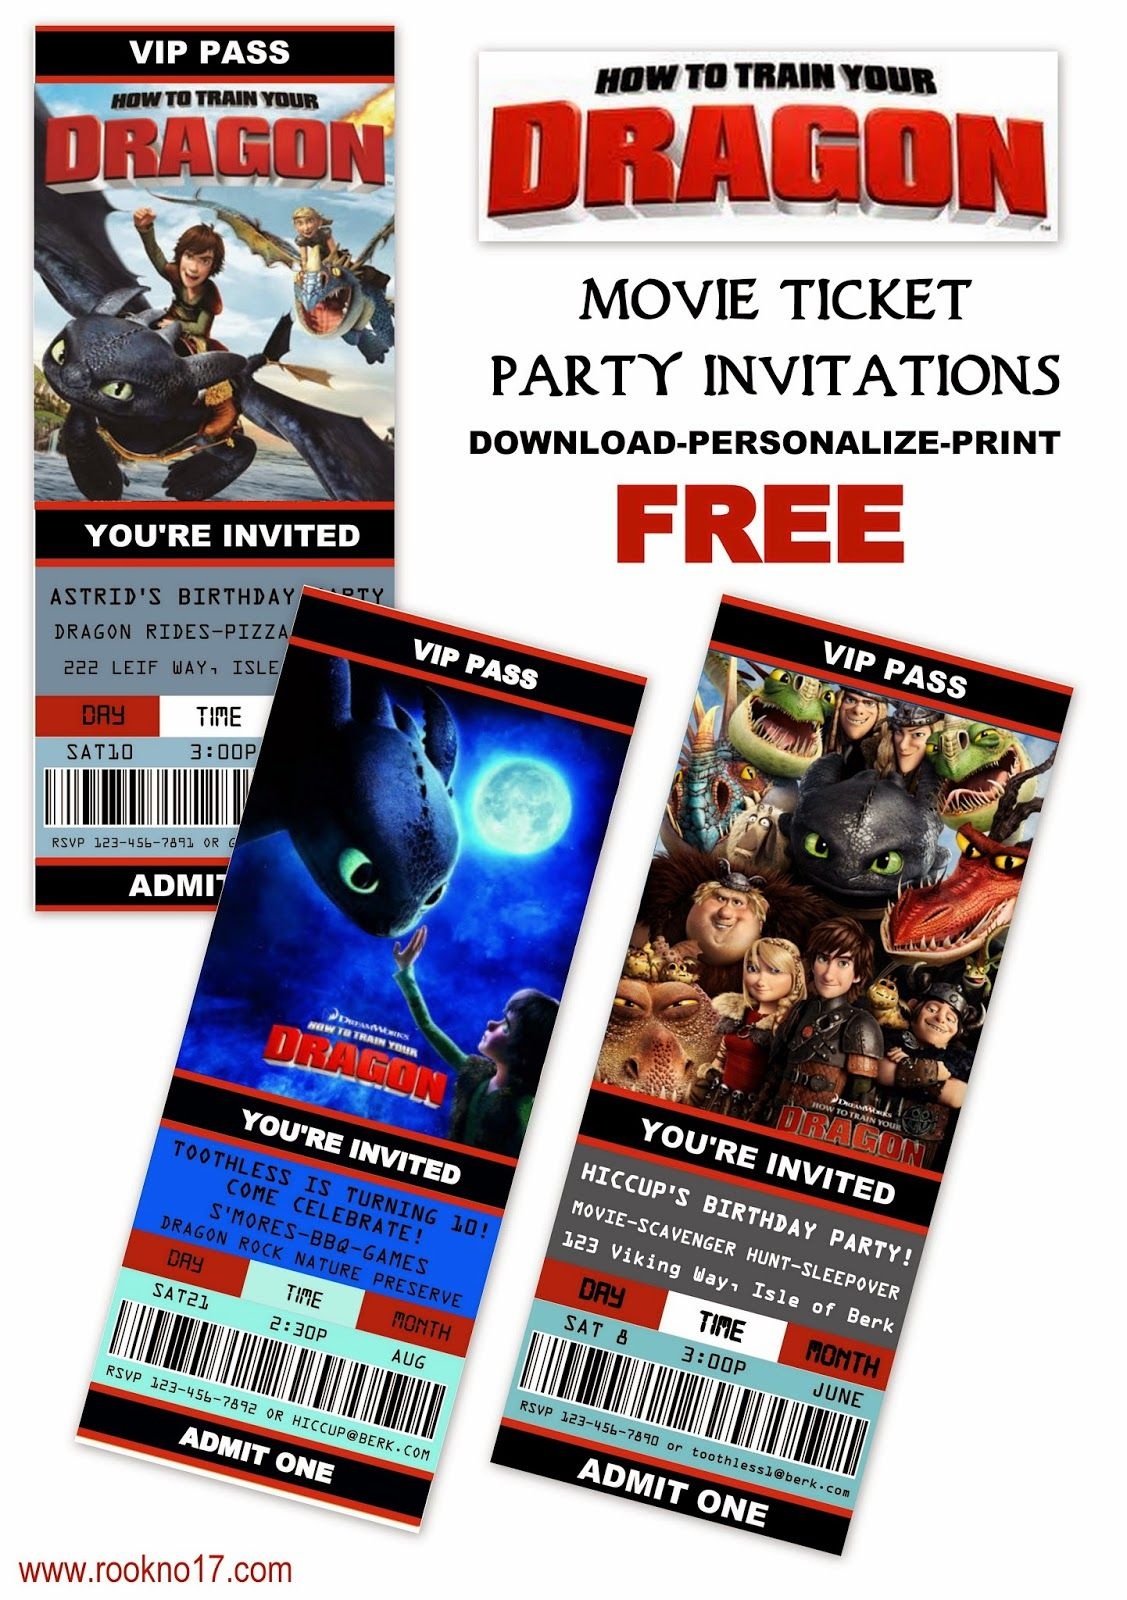 Free Printable Movie Ticket Style Invitations: How To Train Your - How To Train Your Dragon Birthday Invitations Printable Free